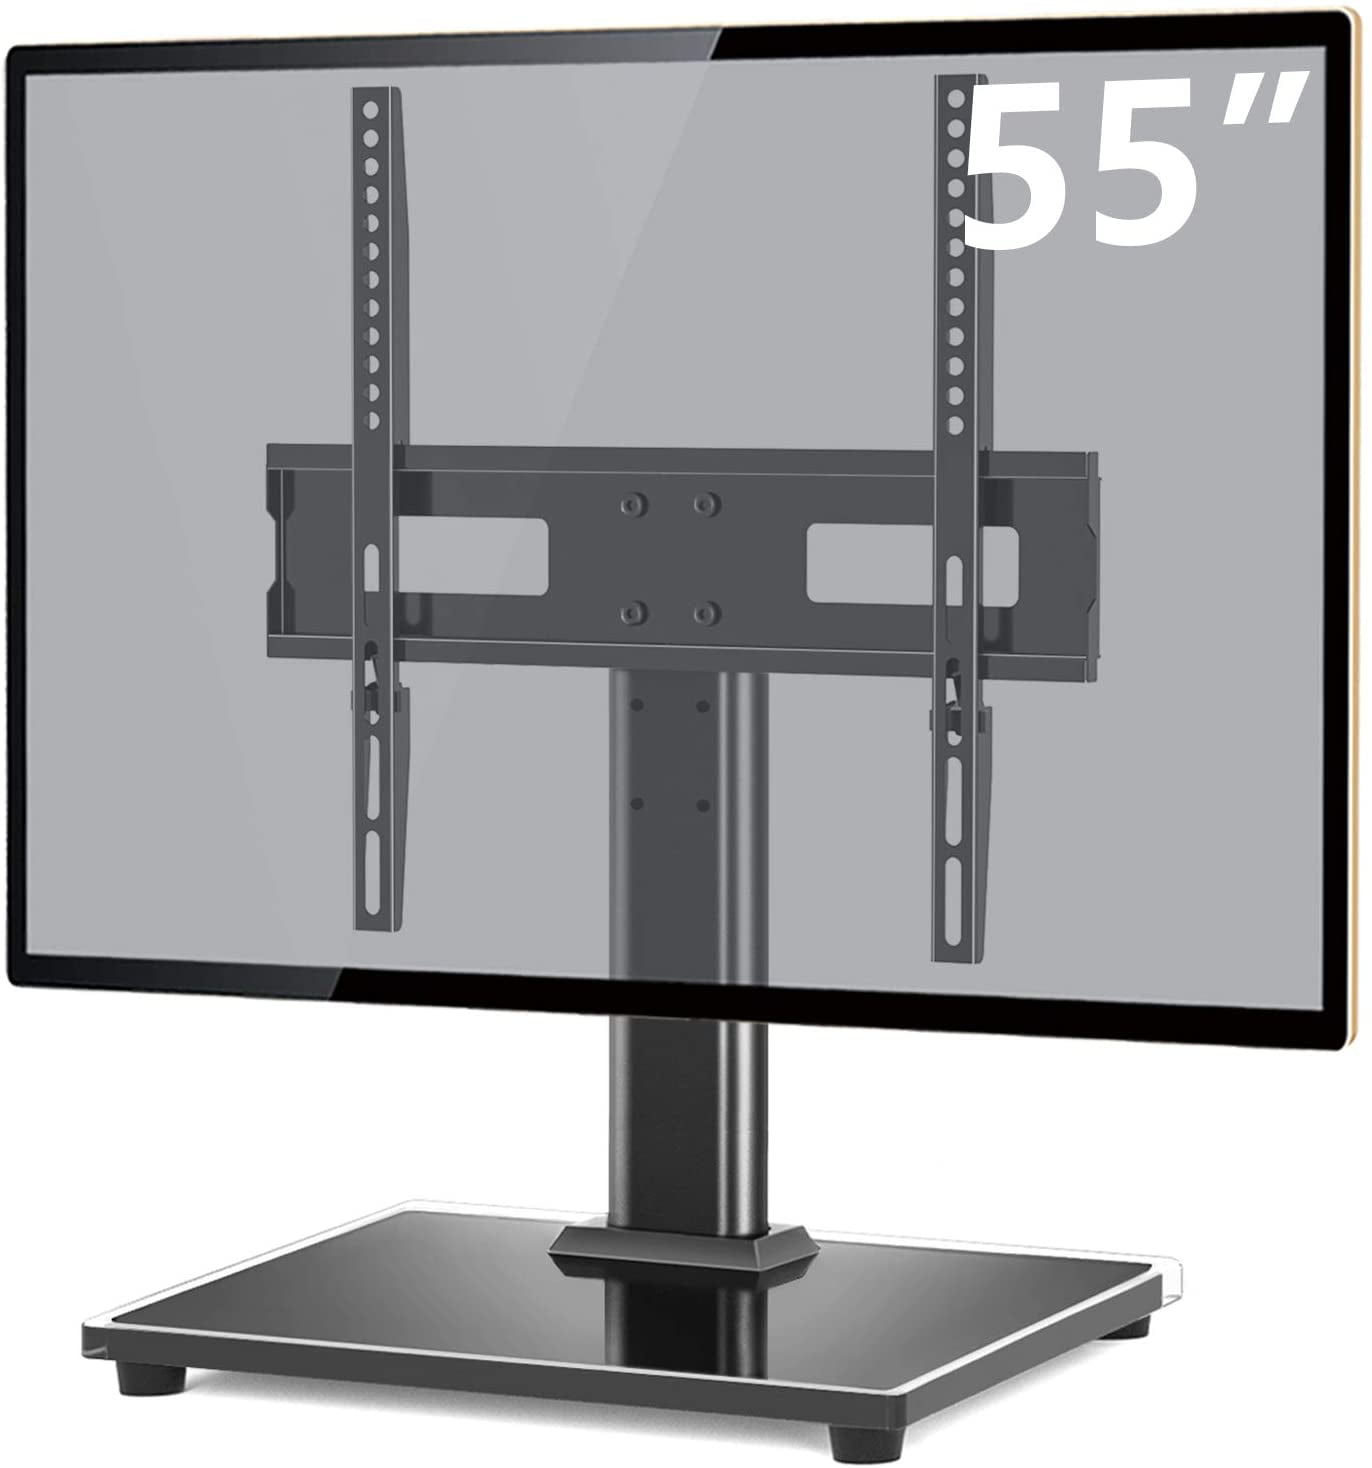 TableTop TV Stand Base with Universal Mount for 27-55 inch LCD LED OLED TVs 